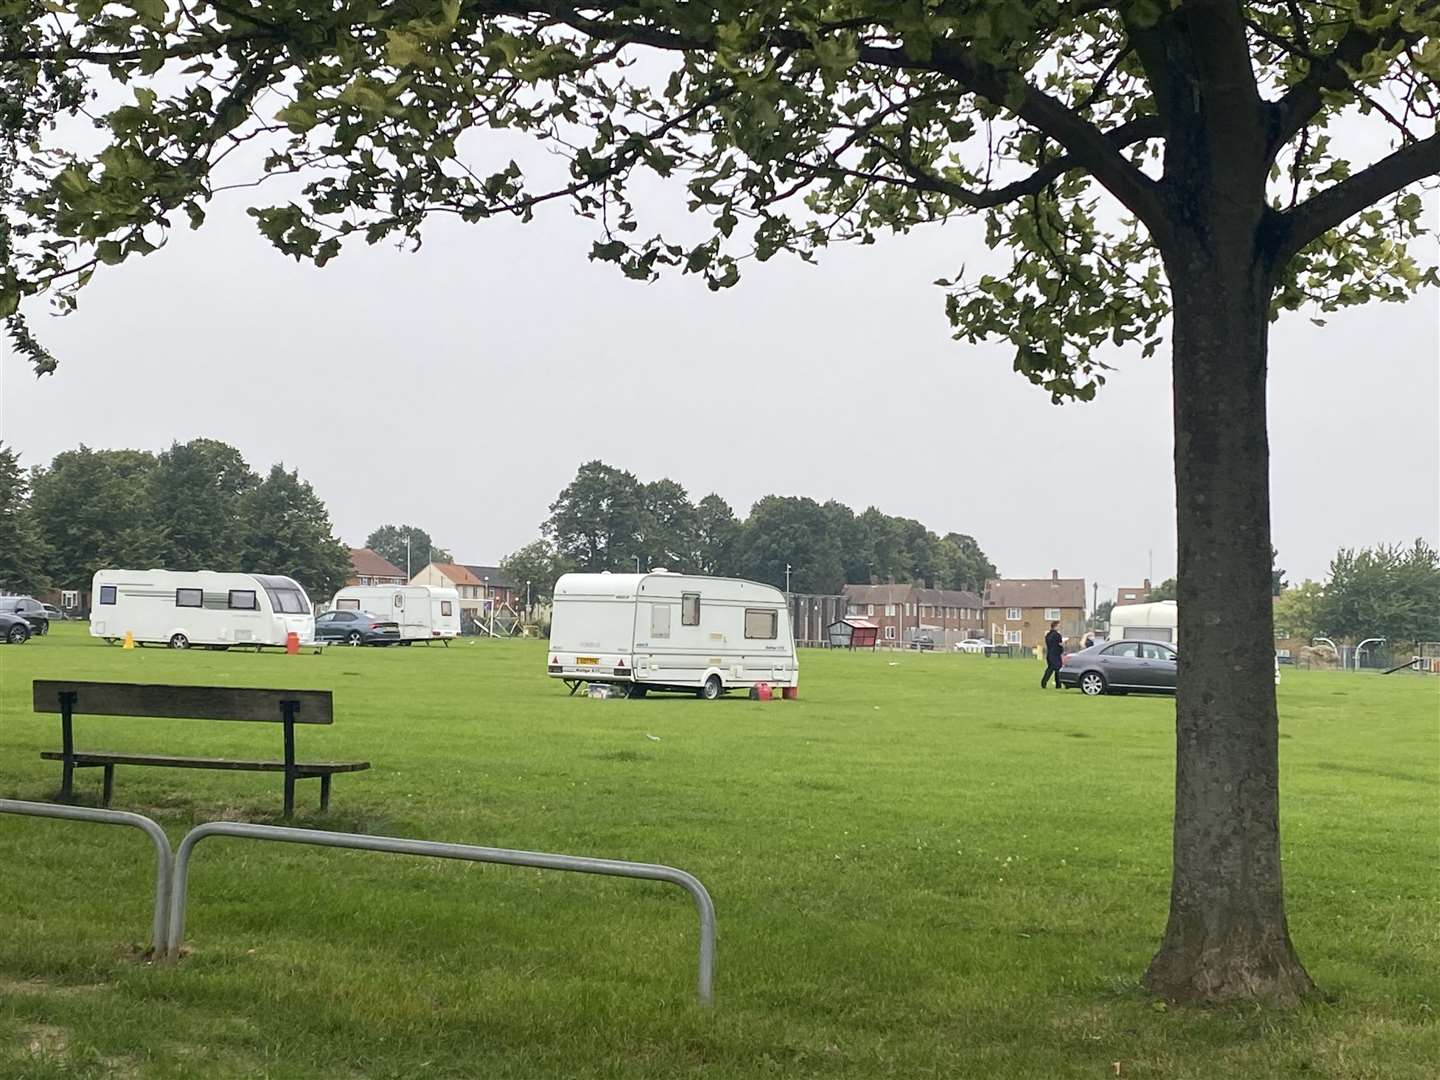 Caravans arrived on Beechings playing fields in Twydall, Gillingham on Sunday night